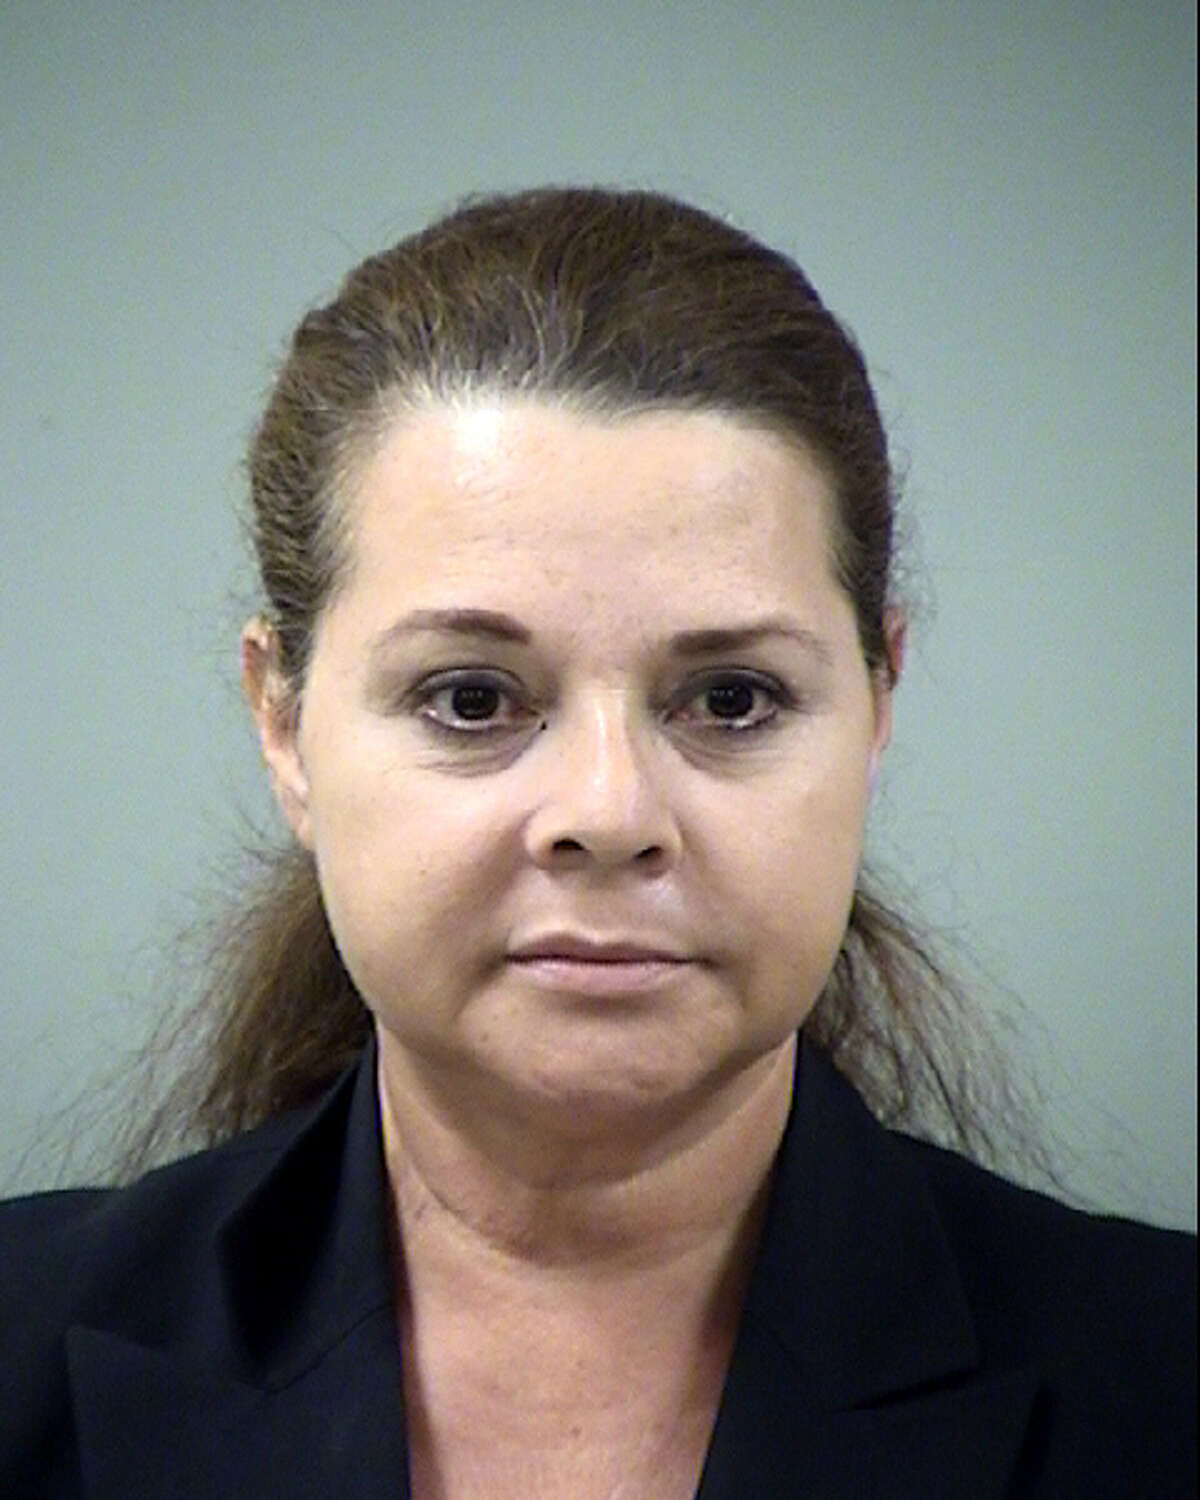 Hilda Valadez is seen in an Aug. 23, 2012 Bexar County Sheriff's Department booking mug taken after she was charged with 46 felony counts that include forging judges' signatures and double-billing the county.